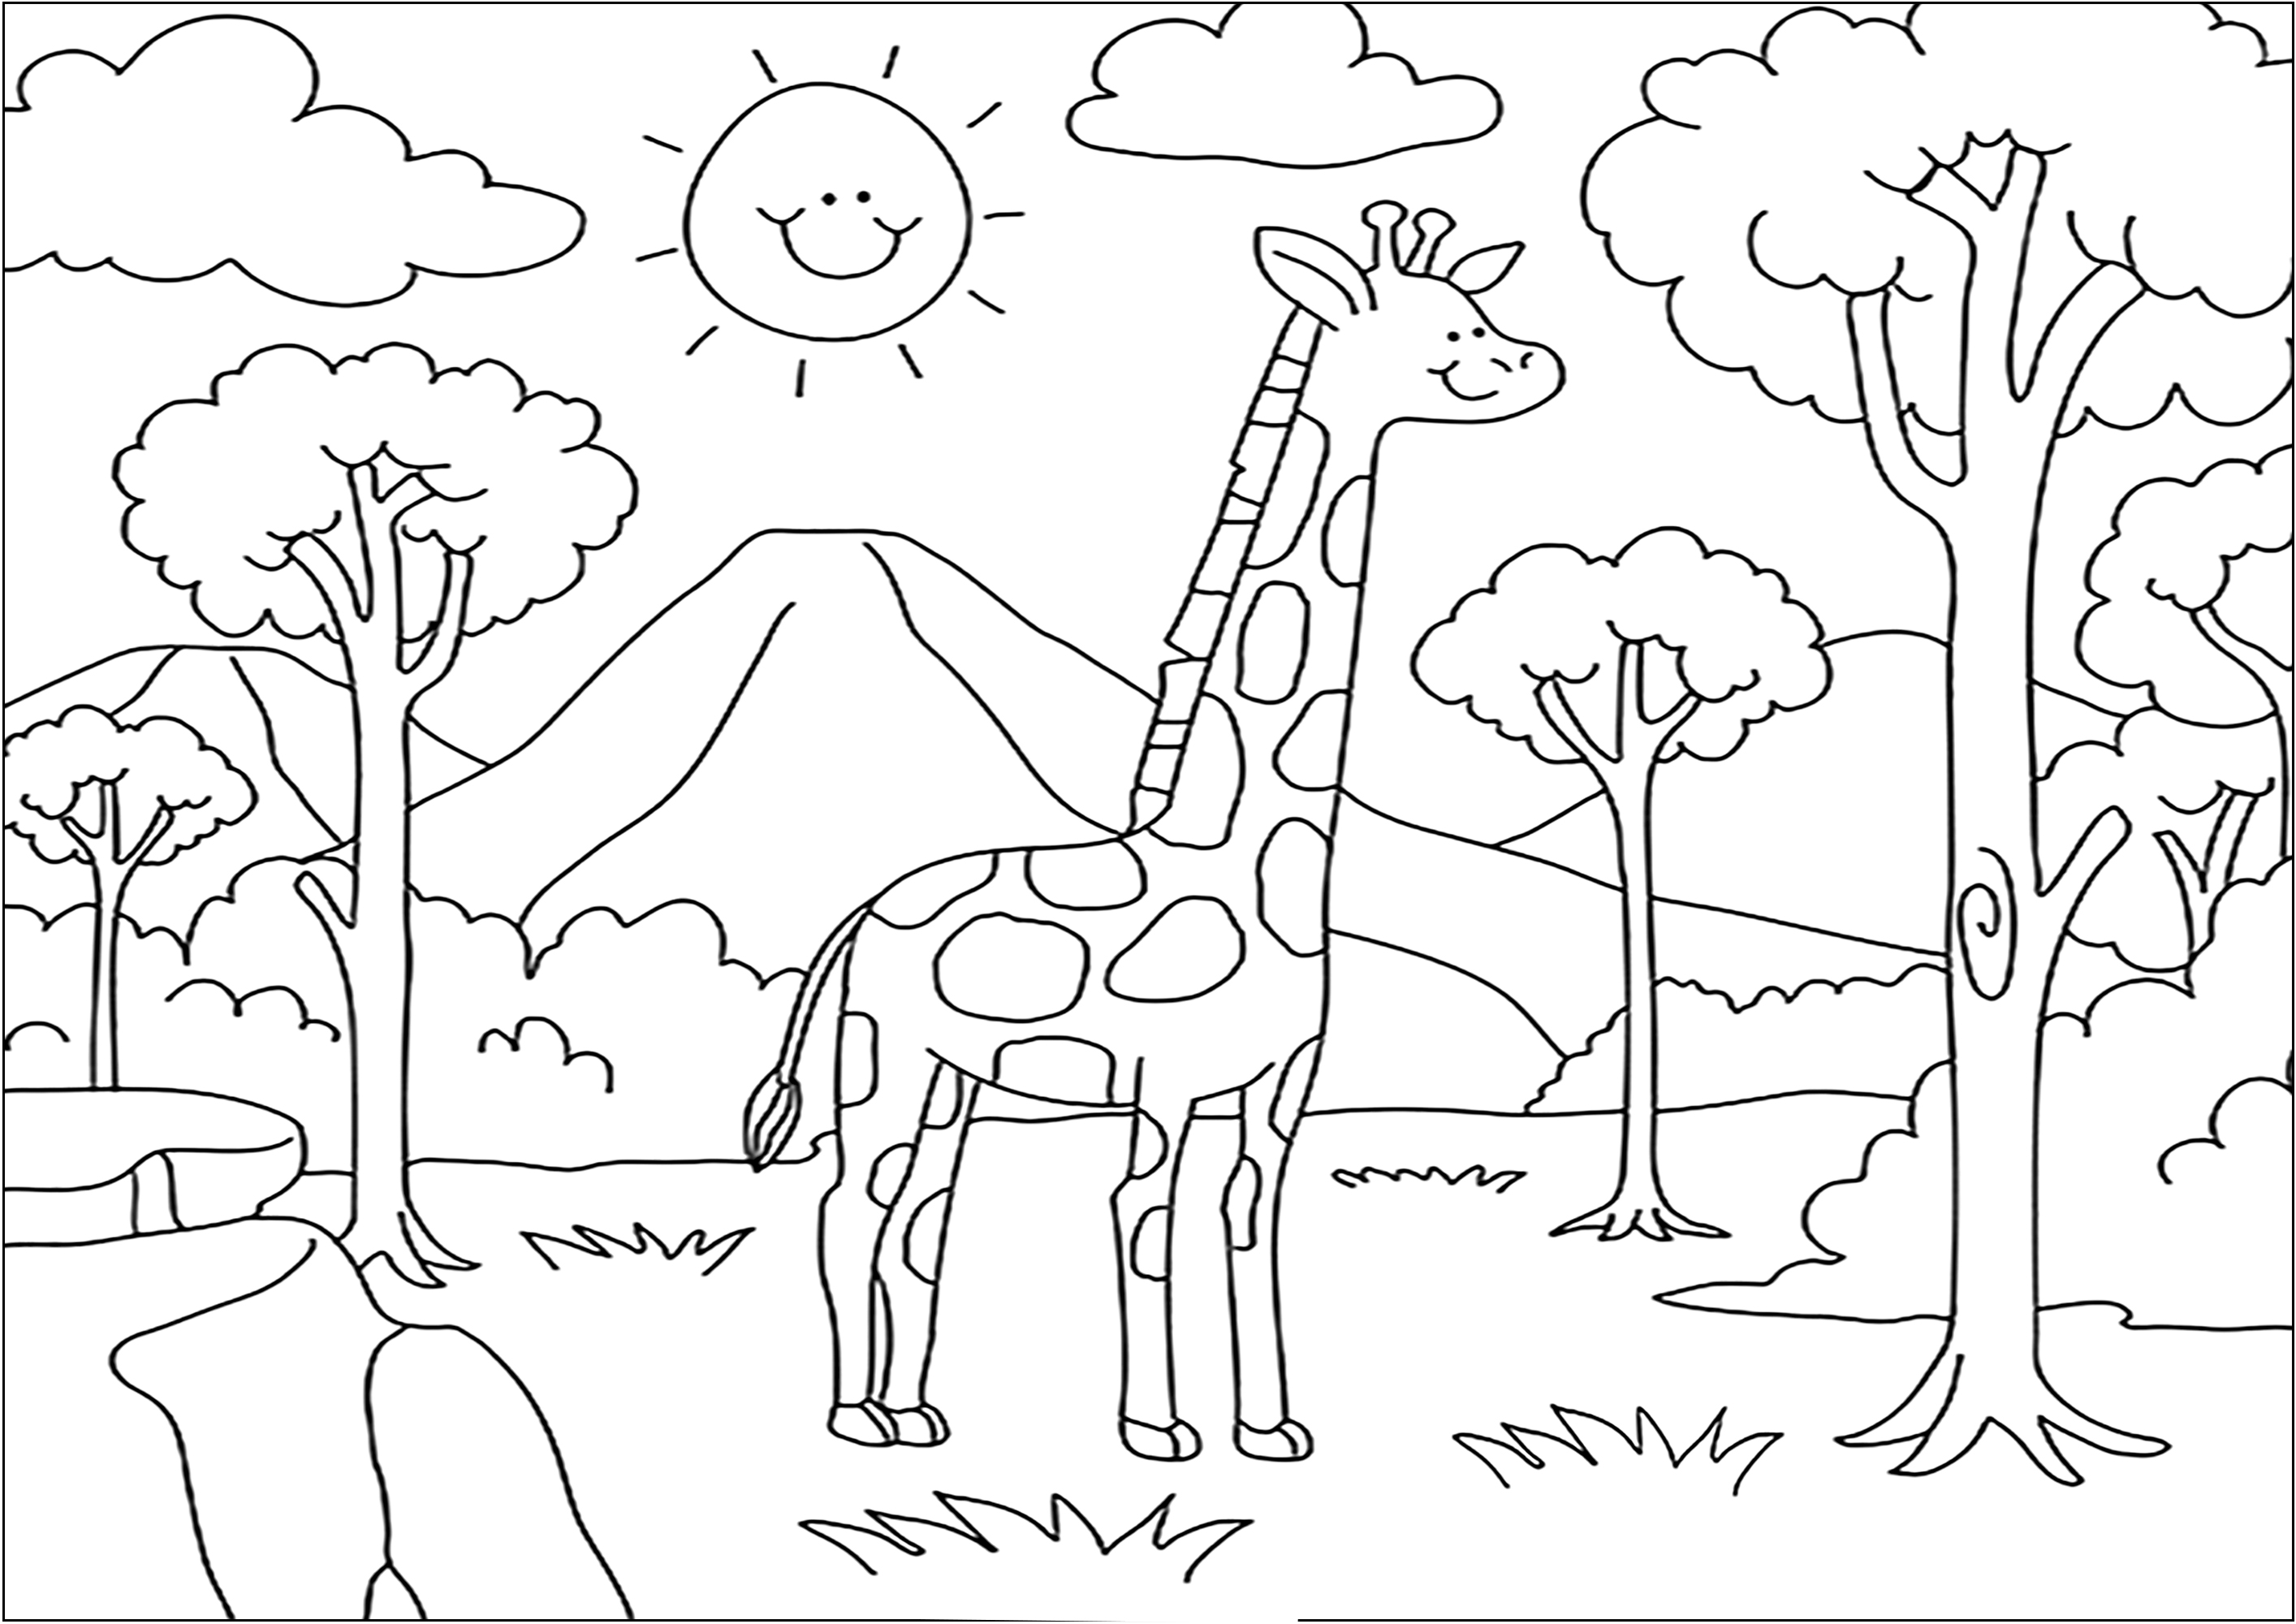 Giraffe in the savannah. Color this lovely landscape with the majestic volcano in the background